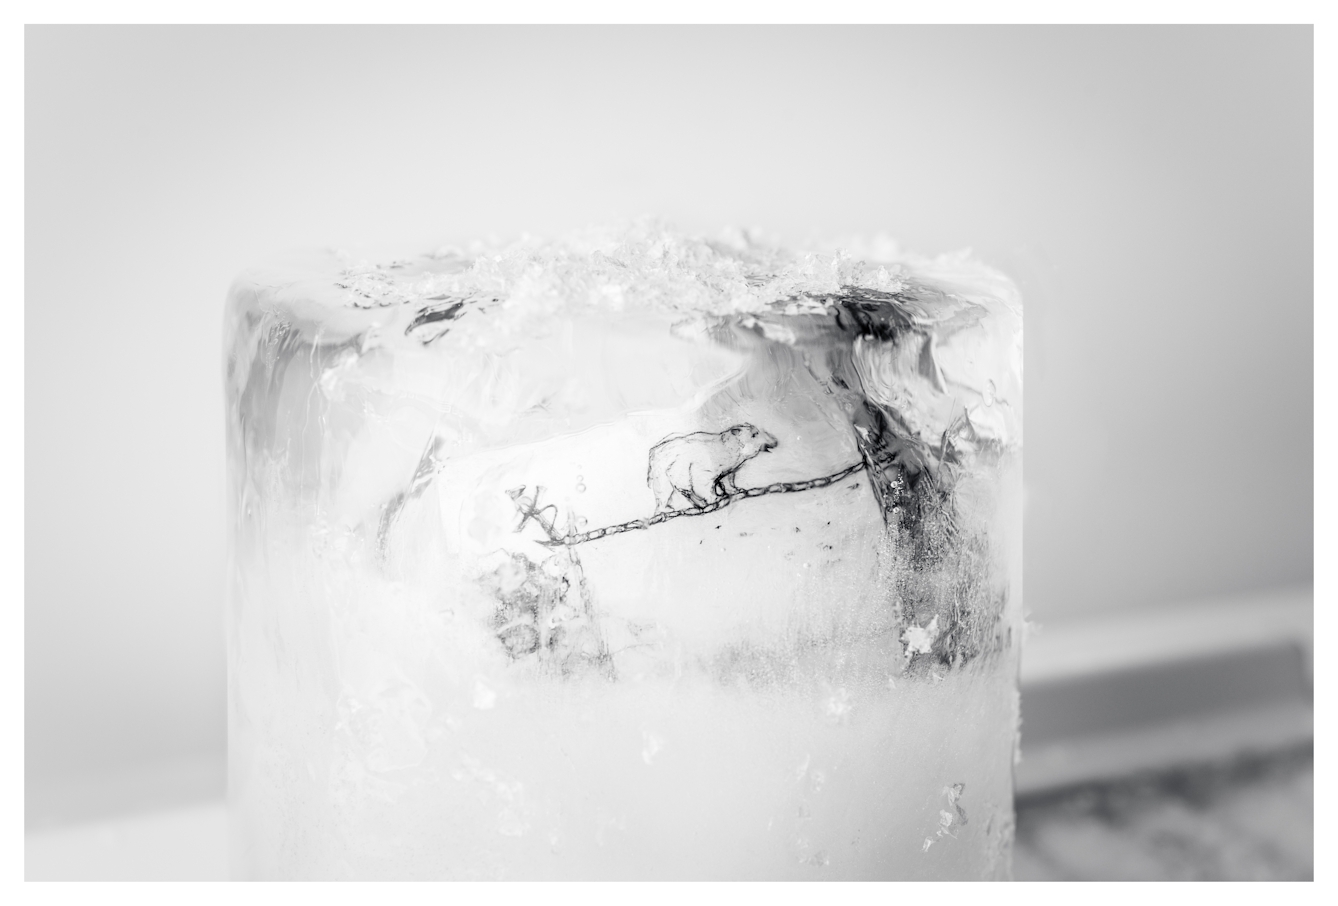 Monotone photograph showing a cylindrical core of frozen water. Encased within the ice is an illustration of a polar bear from the 1800s that can just be seen through the distortions of the ice wall and opaque frosting. The ice core is standing vertically on a fridge freezer shelf.